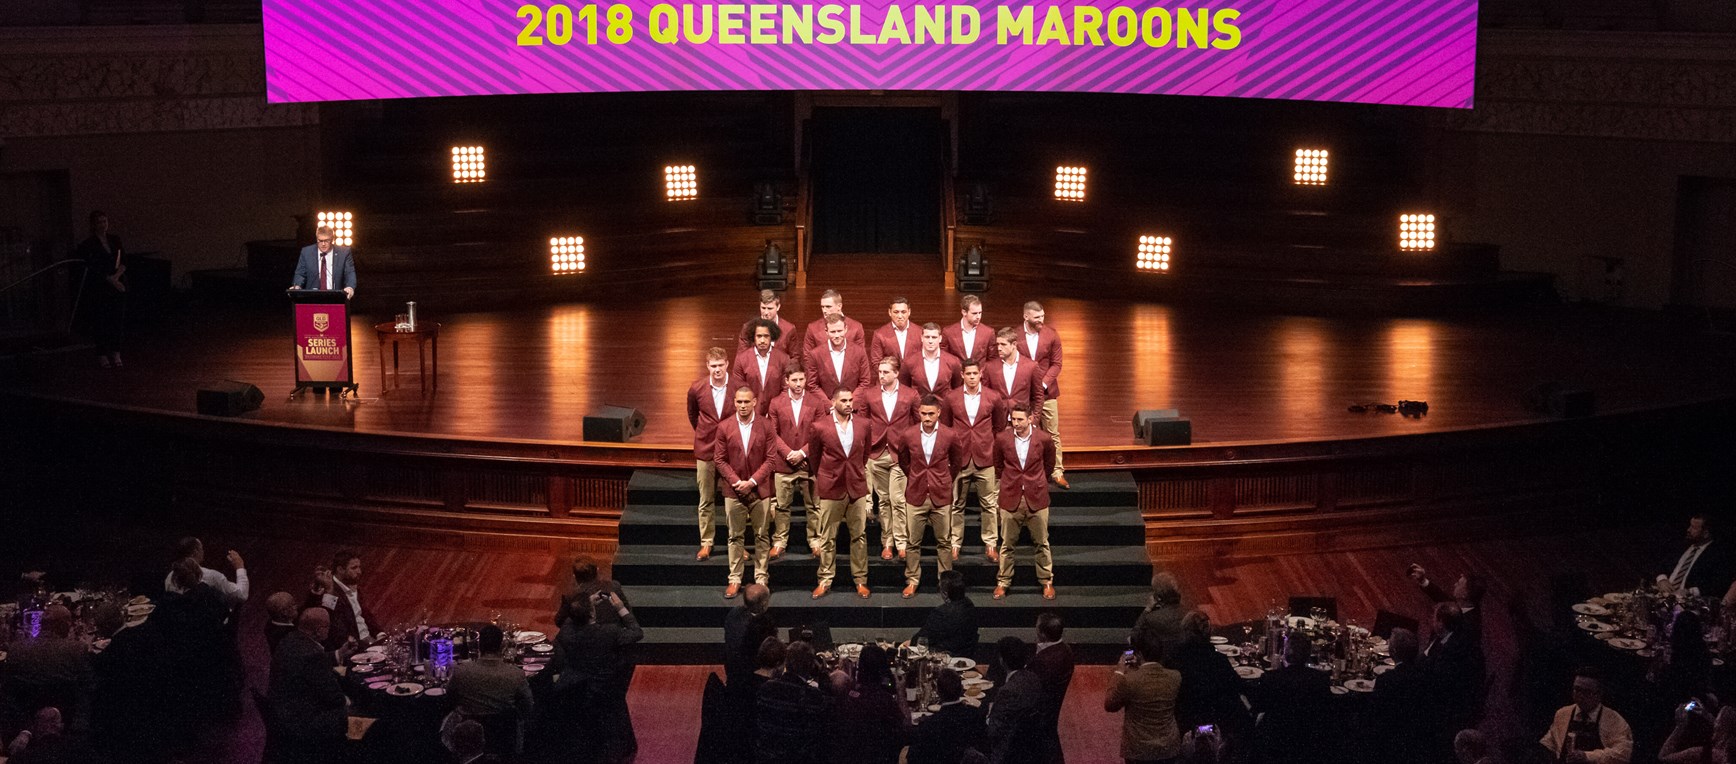 Gallery: QLD Maroons Series Launch